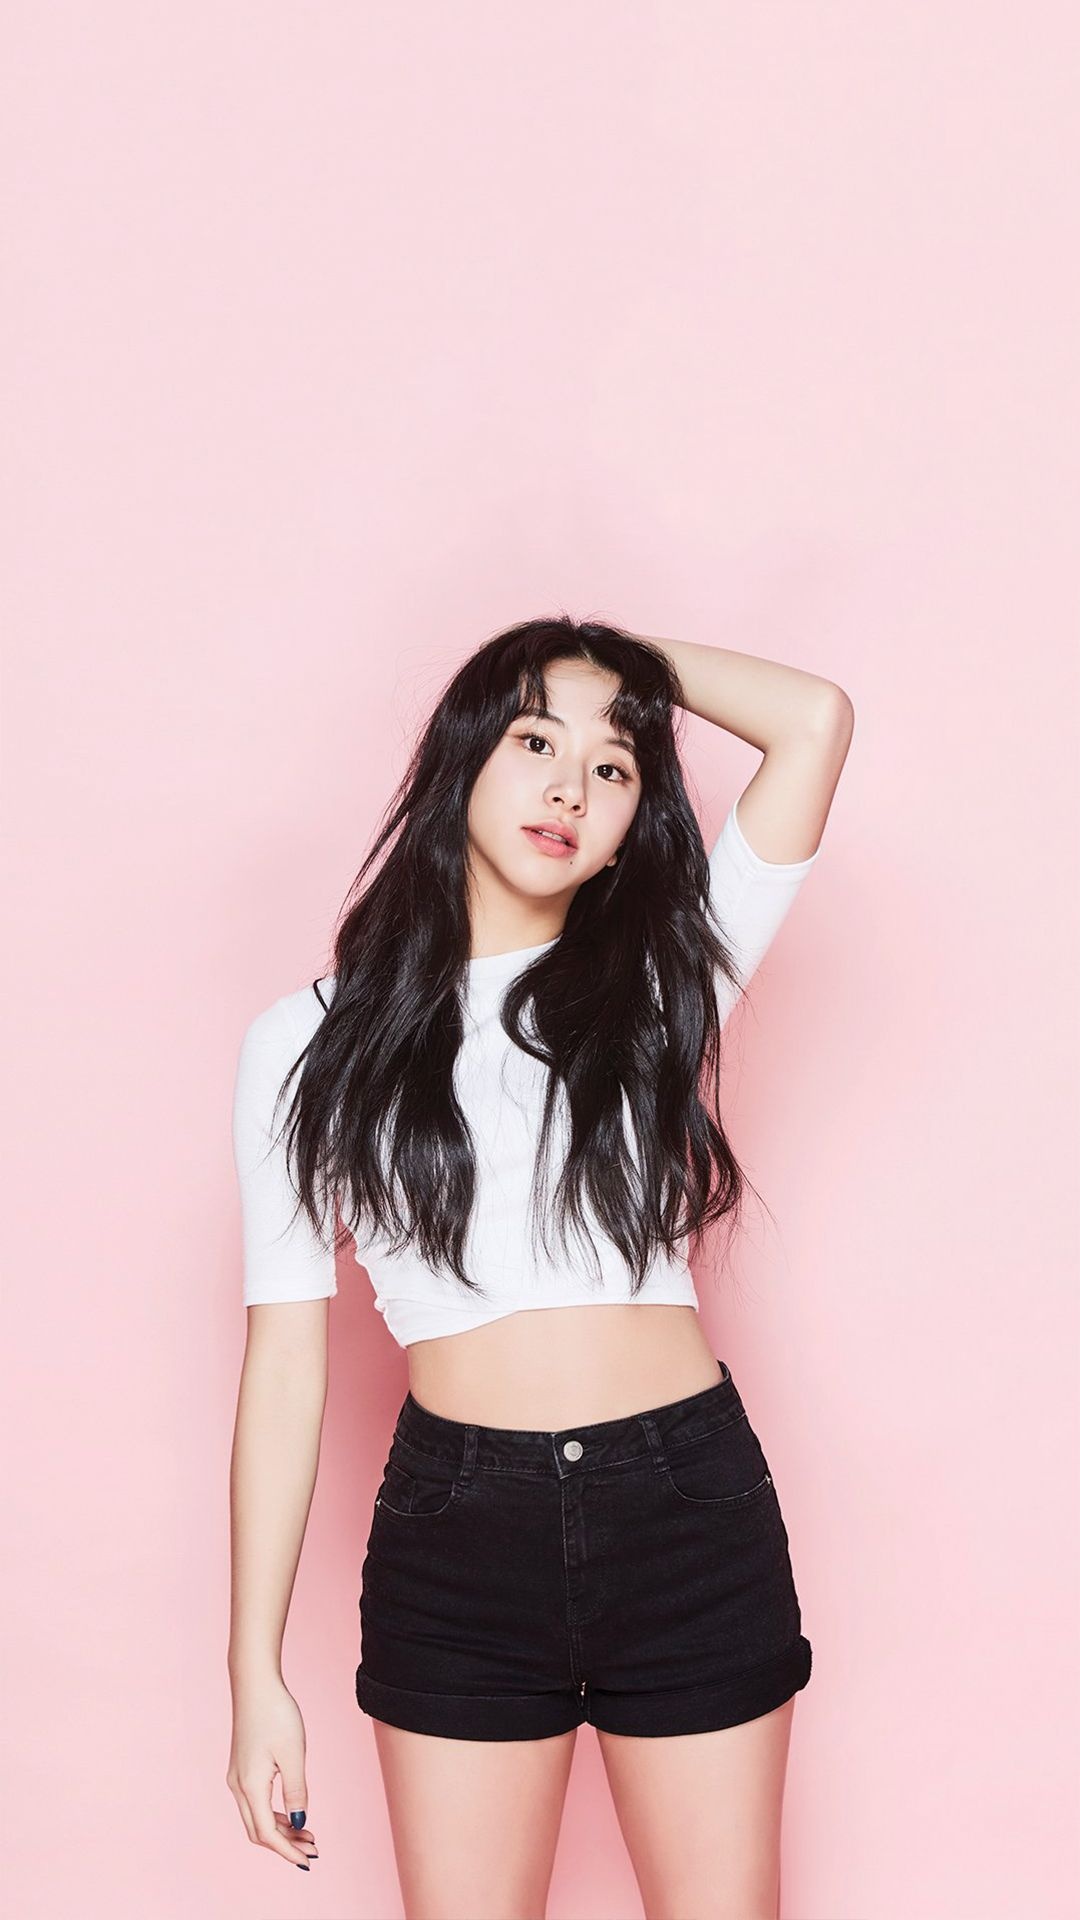 Chaeyoung in TWICE, Son Chaeyoung wallpapers, TWICE backgrounds, Kpop idol, 1080x1920 Full HD Phone